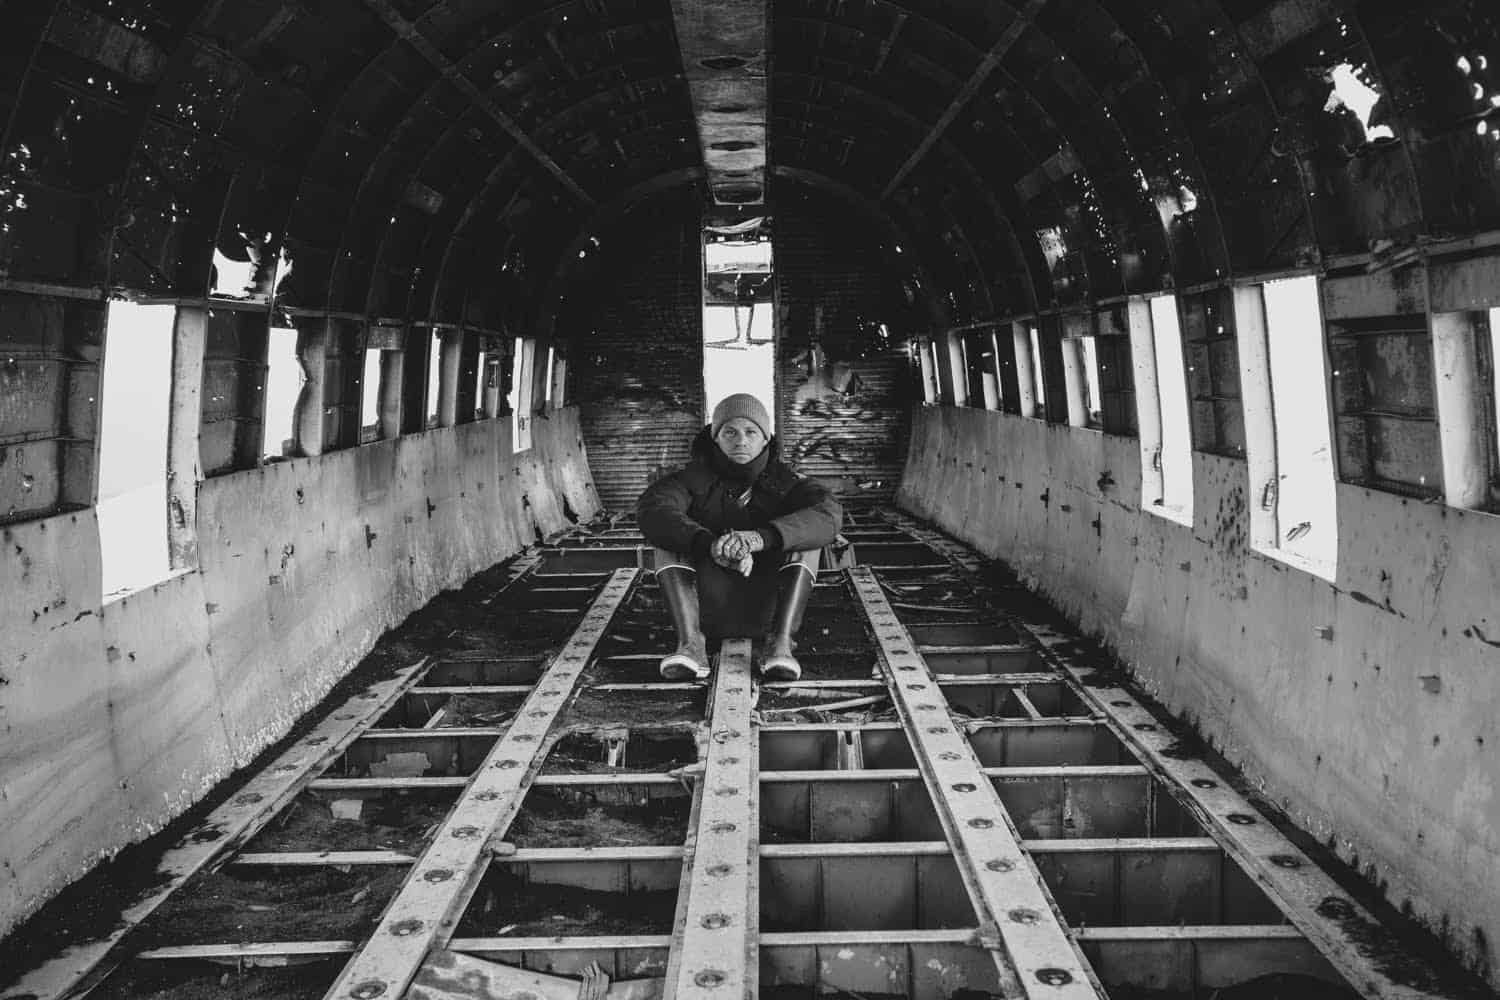 Checking out the abandoned airplane in Iceland